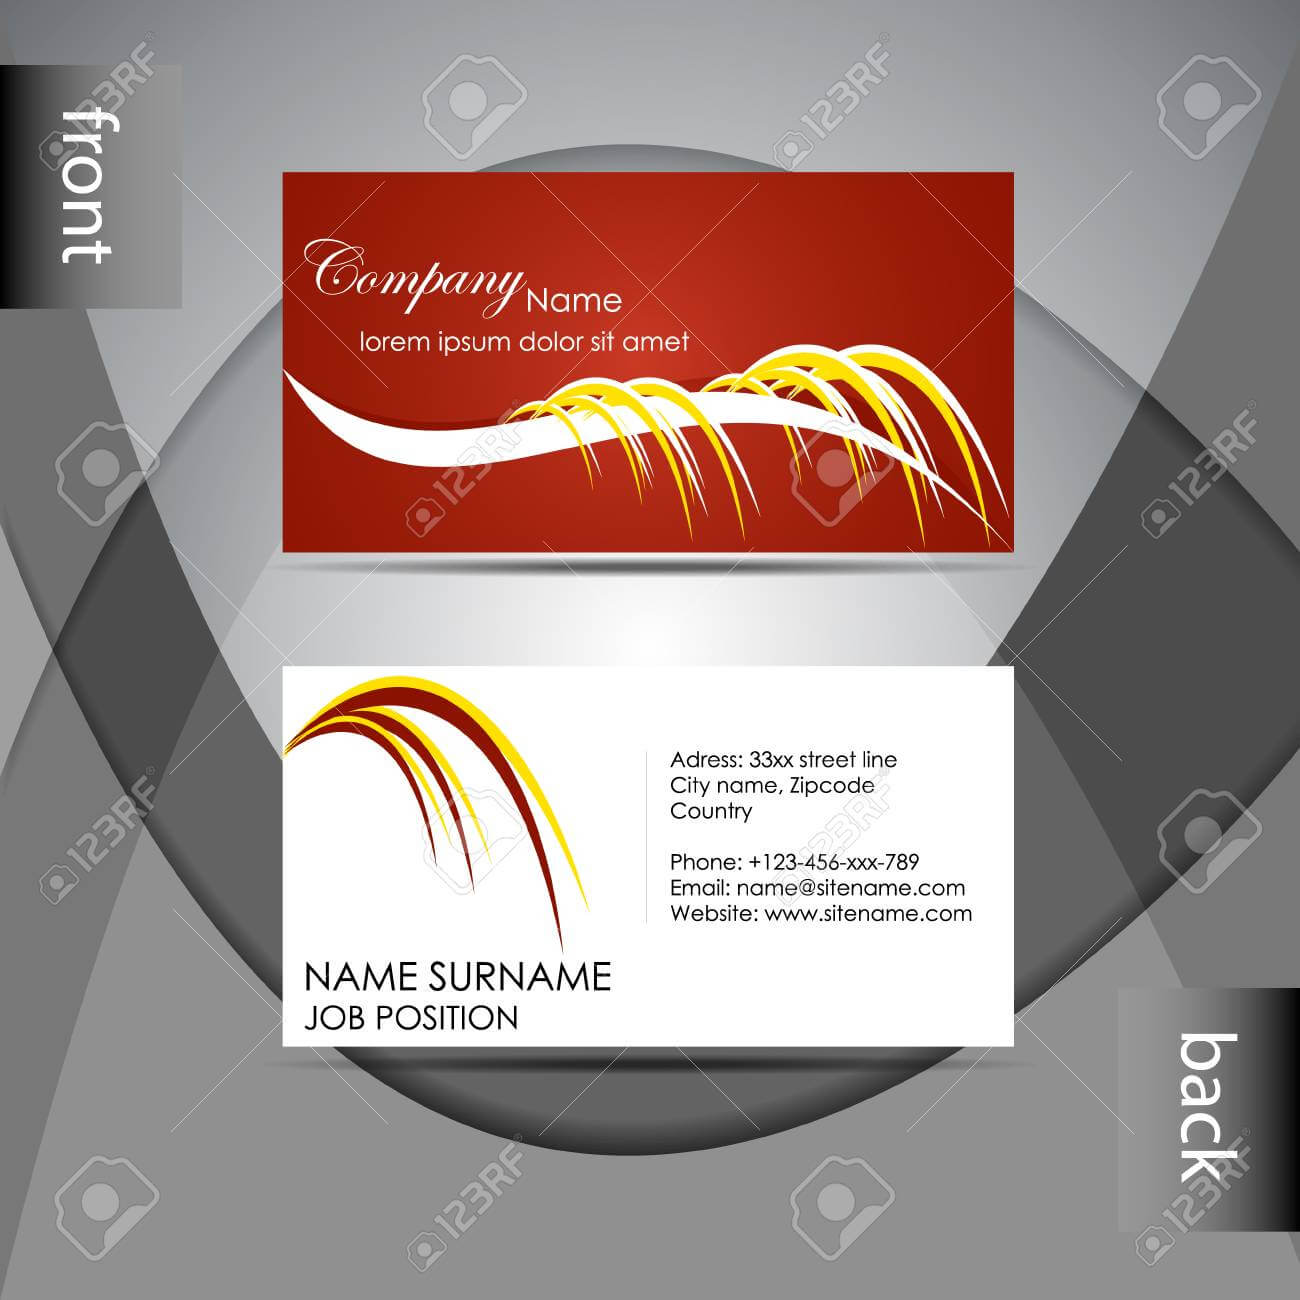 015 Template Ideas Professional Business Card Abstract Or Regarding Professional Name Card Template